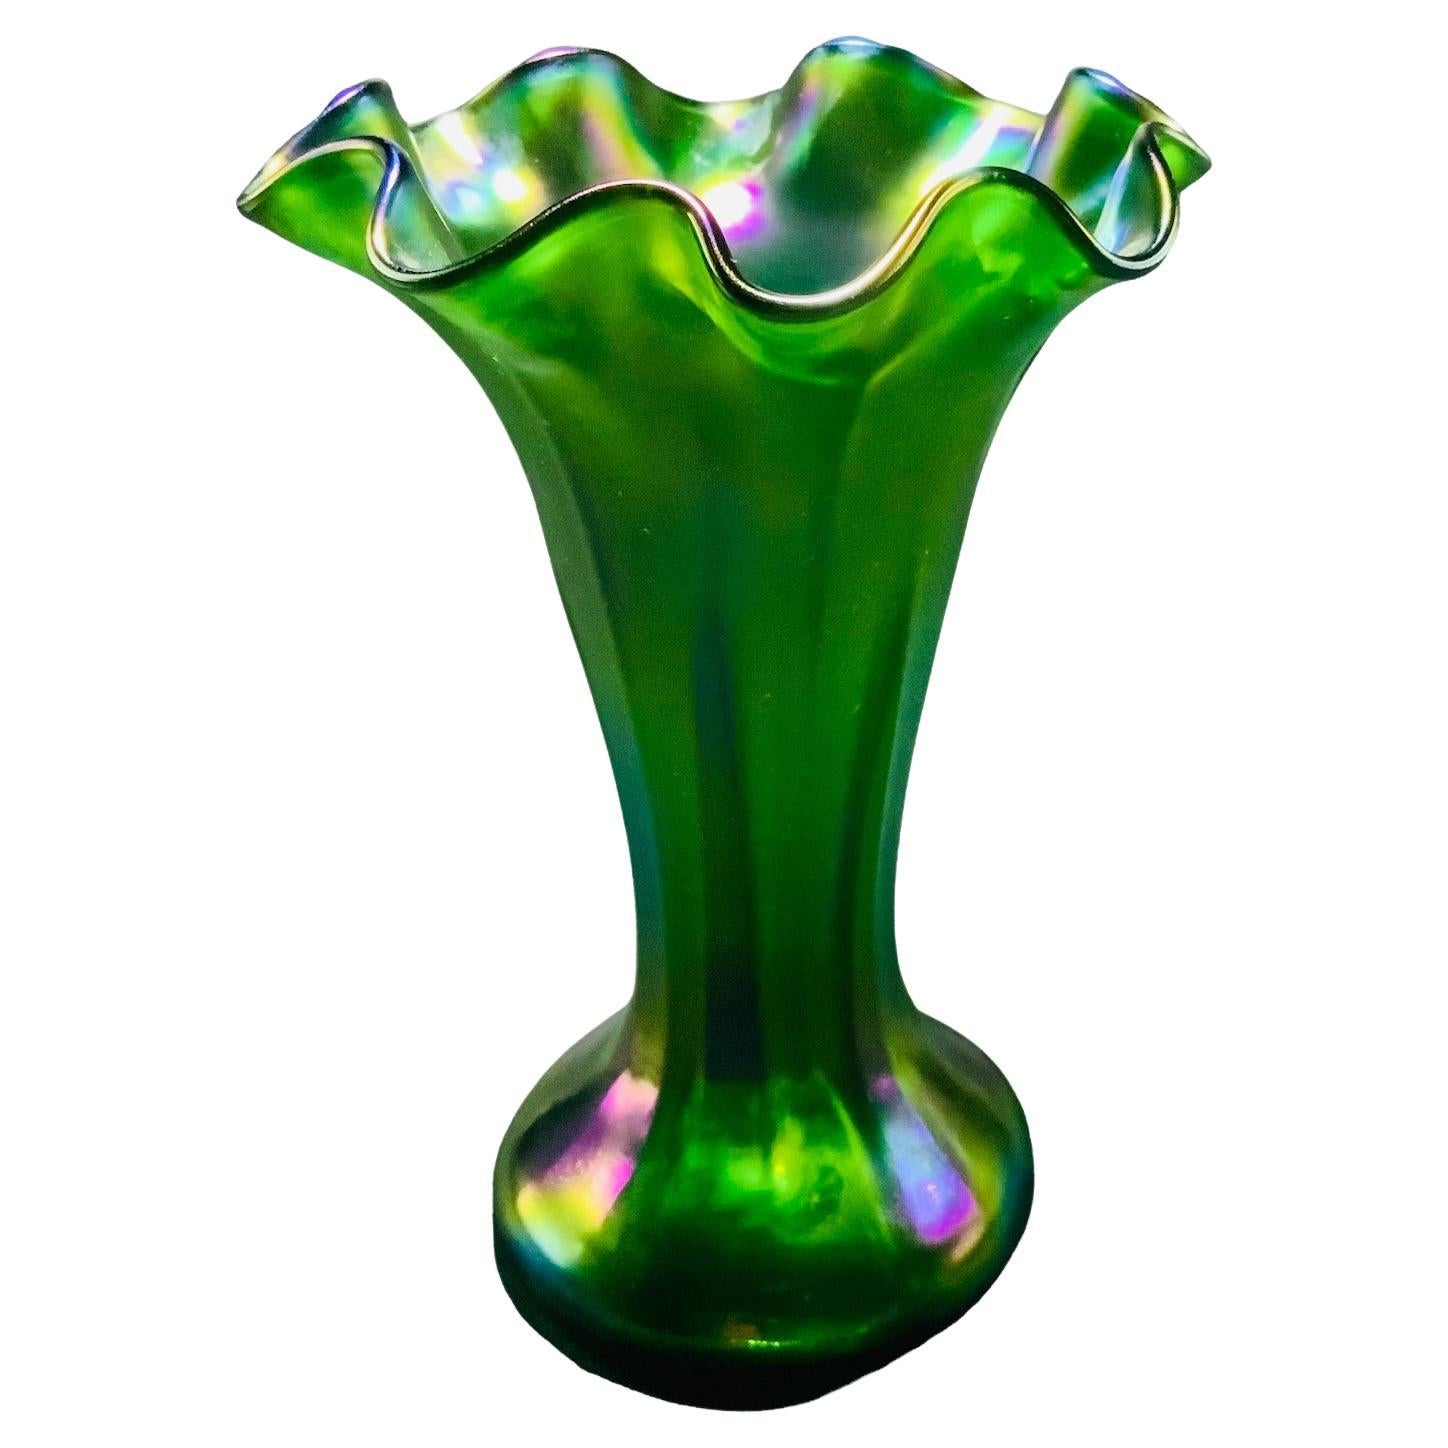 This is a small iridescent Art Glass flower vase. It depicts a different shades of green and few pink, yellow and purple color spots glass flower vase with several ruffles upper border. The whole vase is adorned with reeded bands that match the